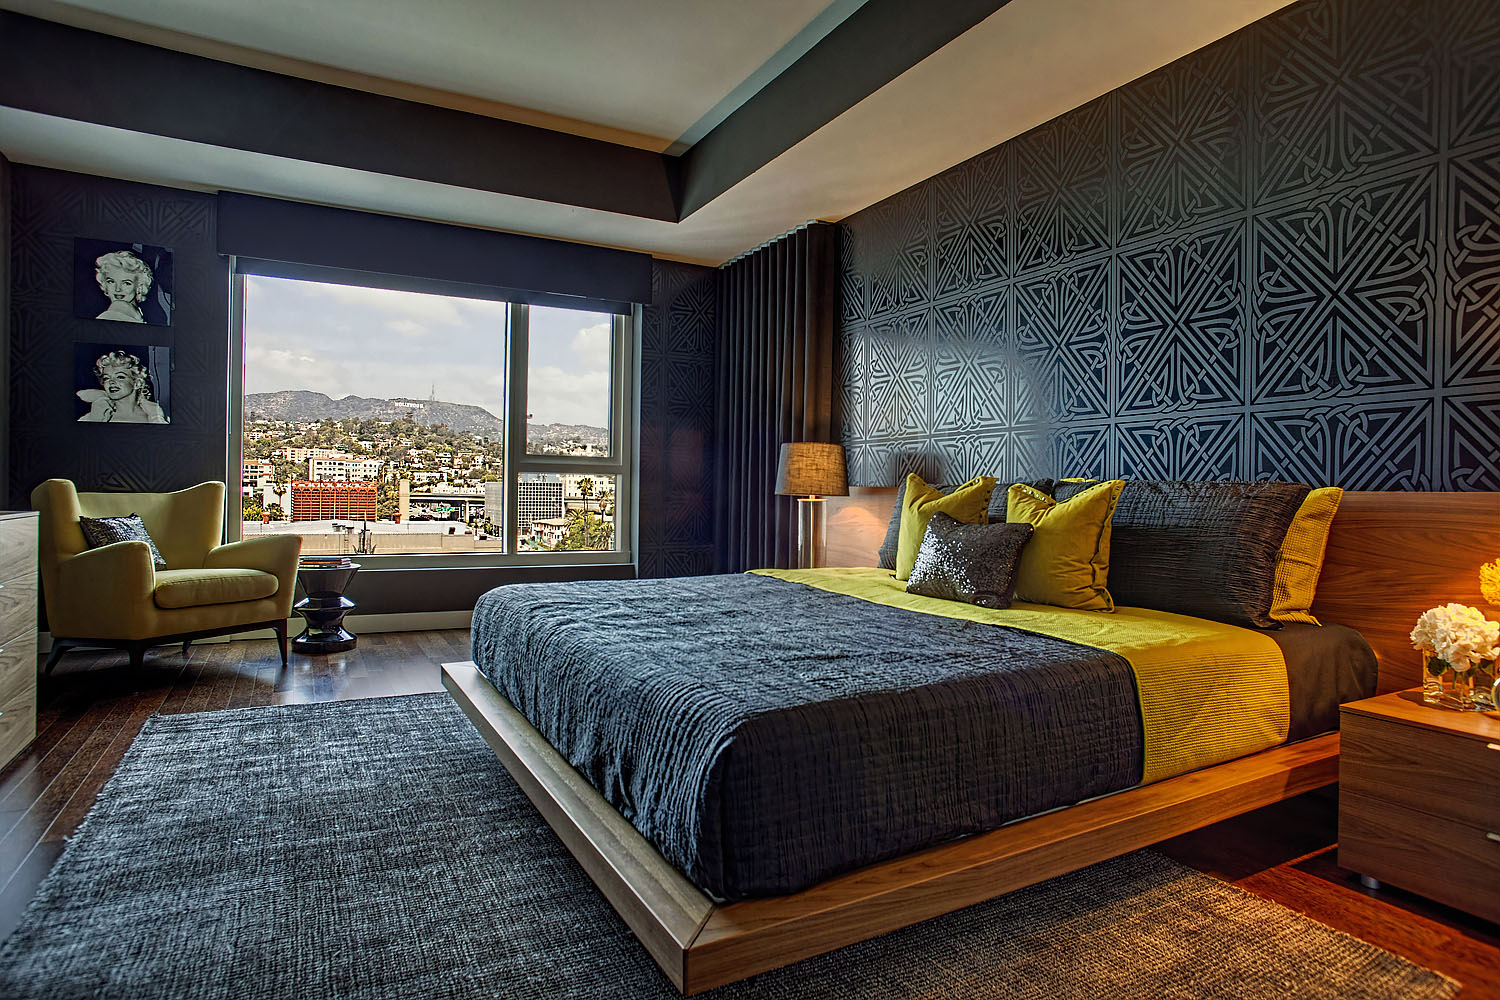 Midcentury modern meets Hollywood glam at the W Hollywood-Kyle Spivey-Cantoni